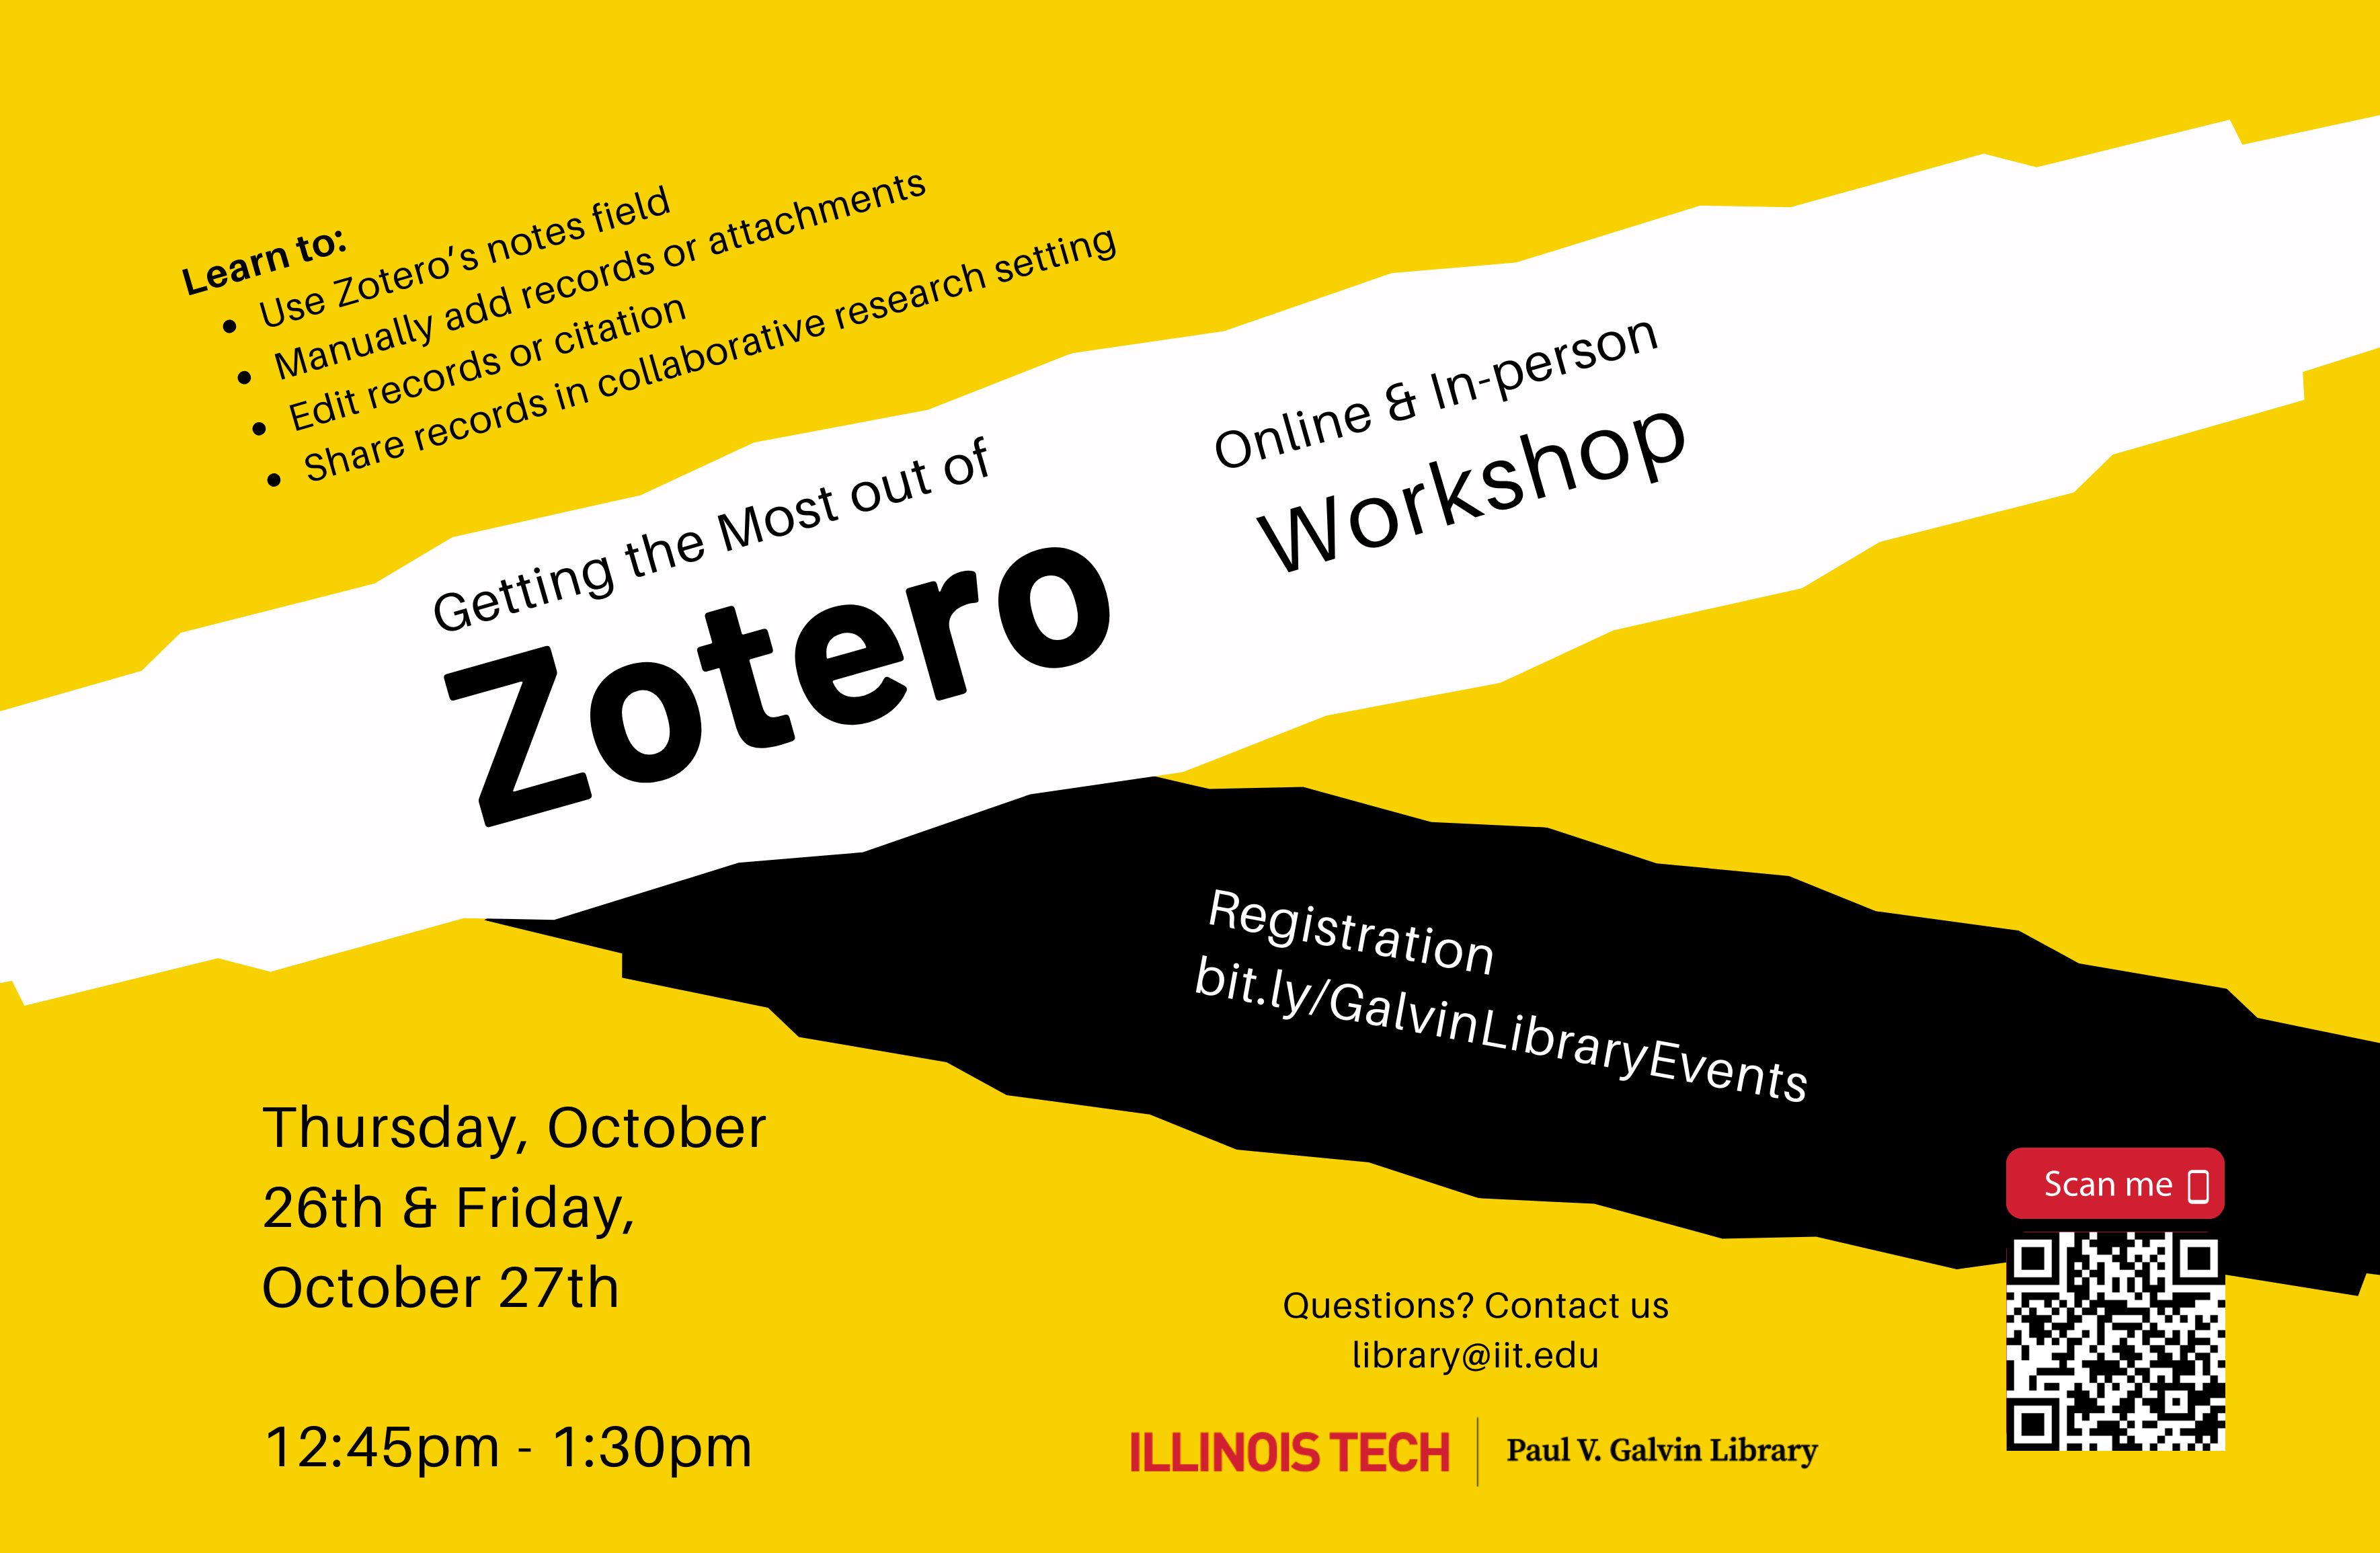 Getting the Most Out of Zotero